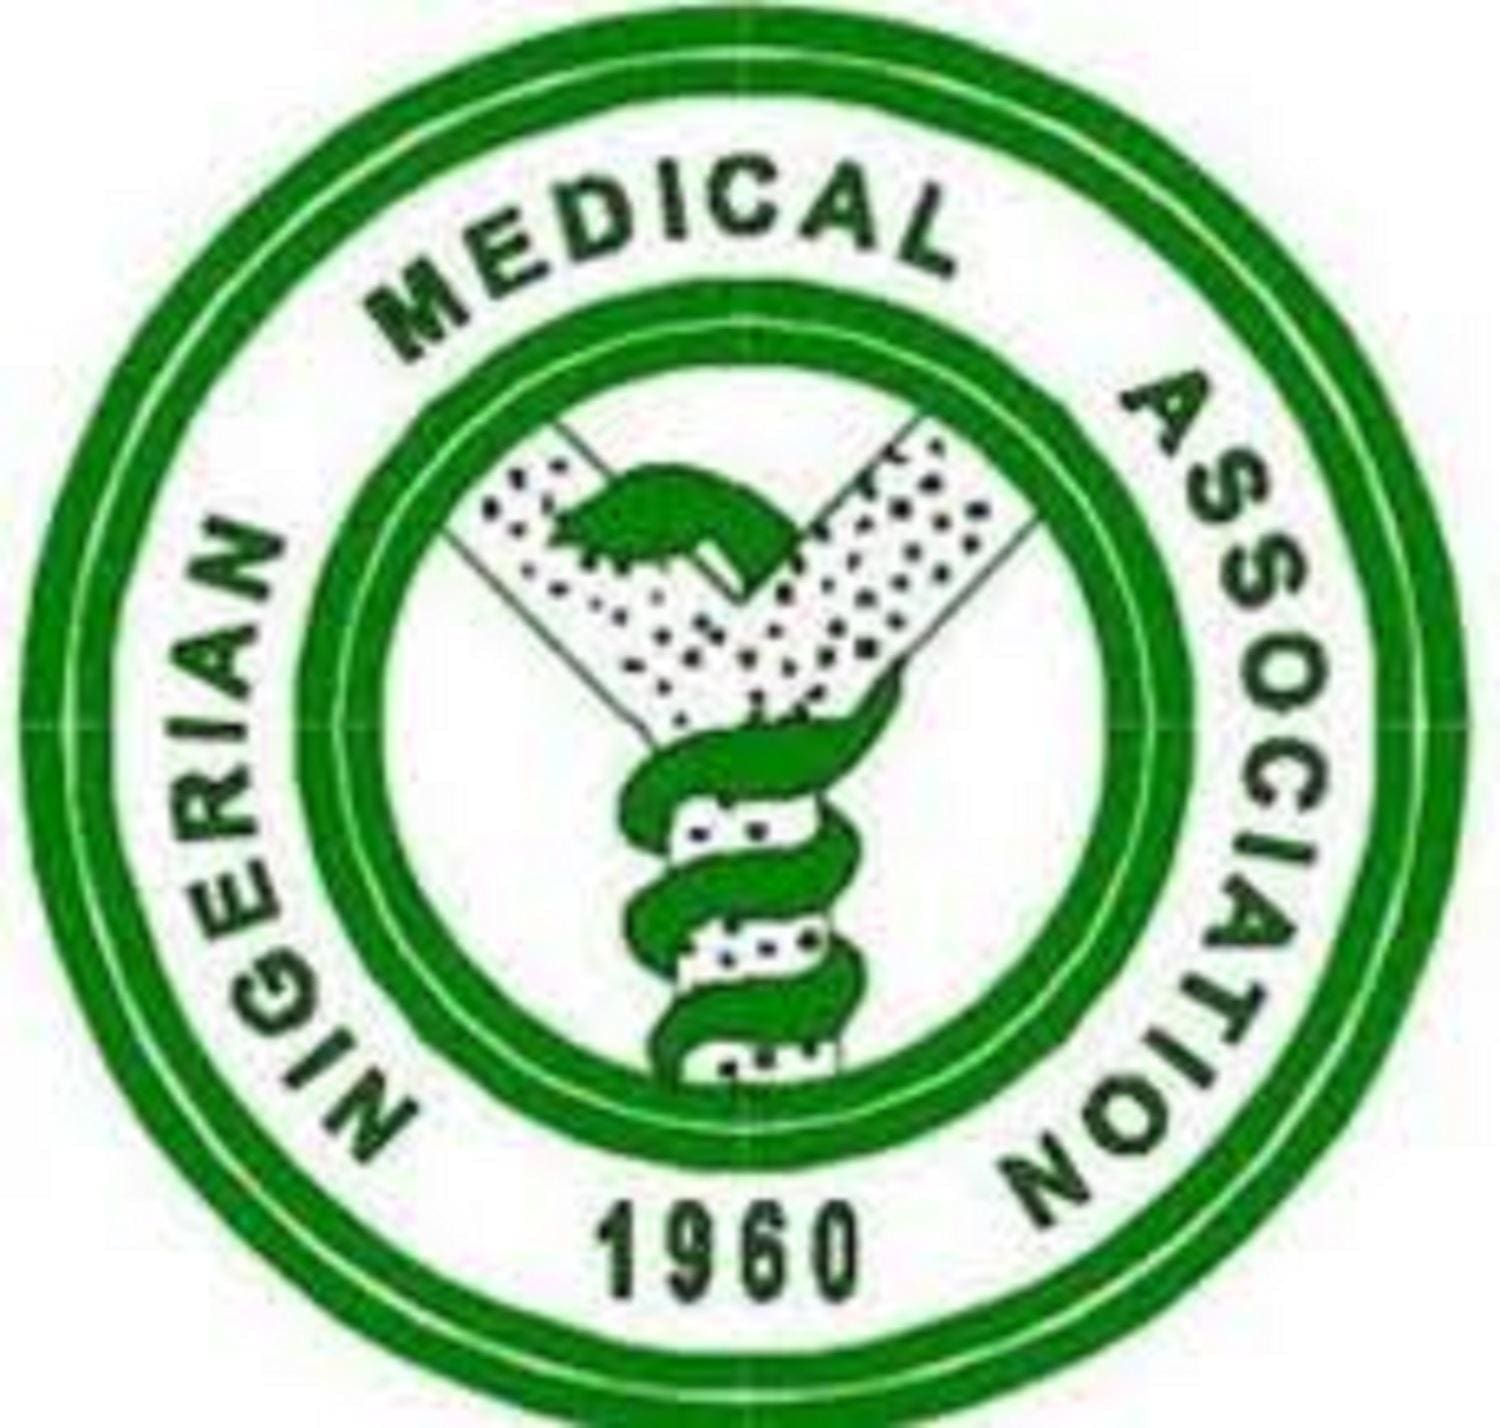 NMA collaborates with veterinary association to control rabies in Nigeria